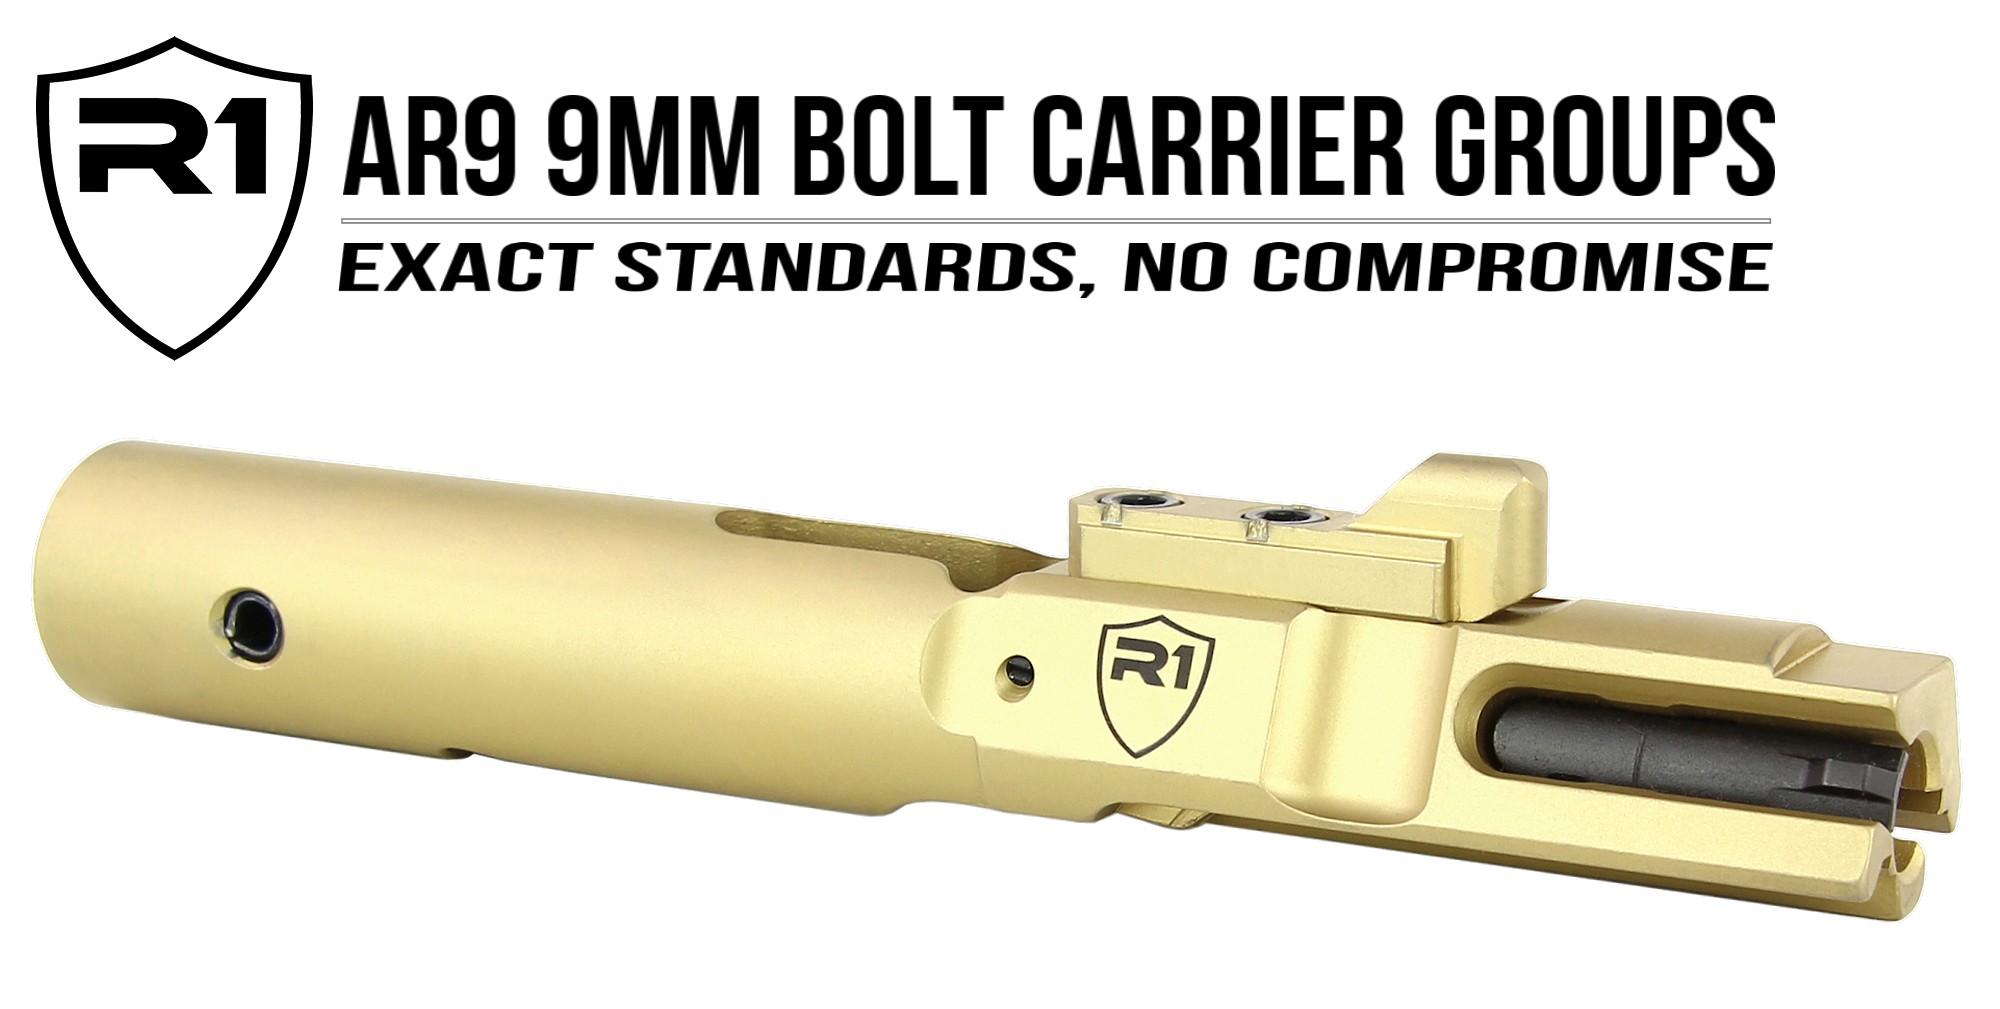 R1 Tactical AR9 Bolt Carrier Group for Colt and Glock Magazines - Titanium Nitride | Redcon1 Tactical